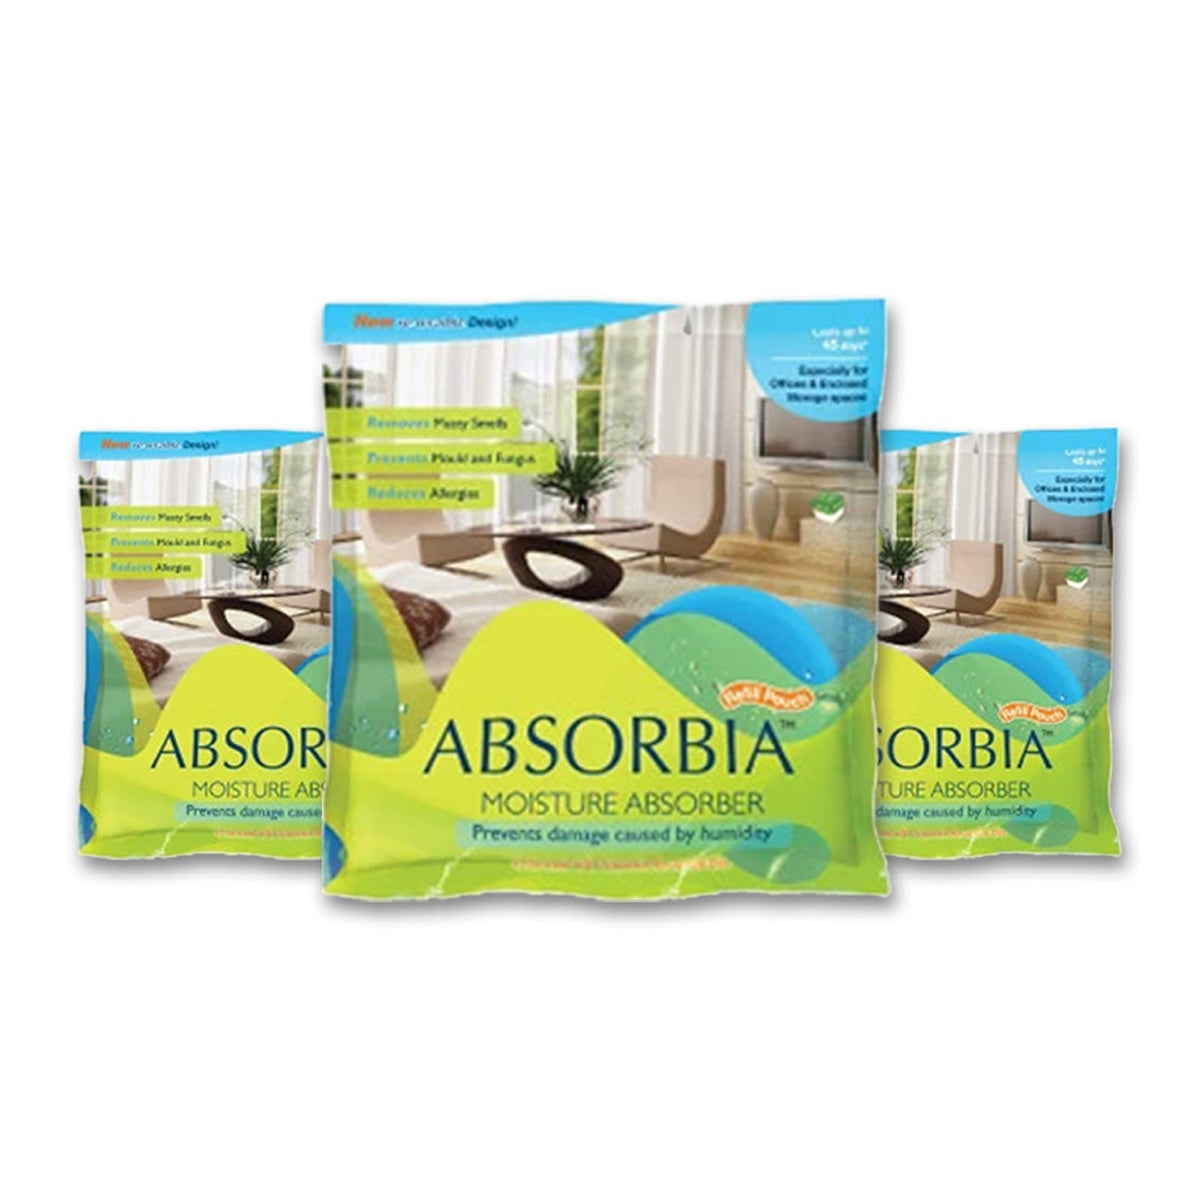 Absorbia Moisture Absorber | Absorbia Refill Pouch for Reusable Box - Pack of 6 (800ml Each) | Dehumidifier for Larger Areas Rooms| Fights Against Moisture, Mould, Fungus Musty Smells